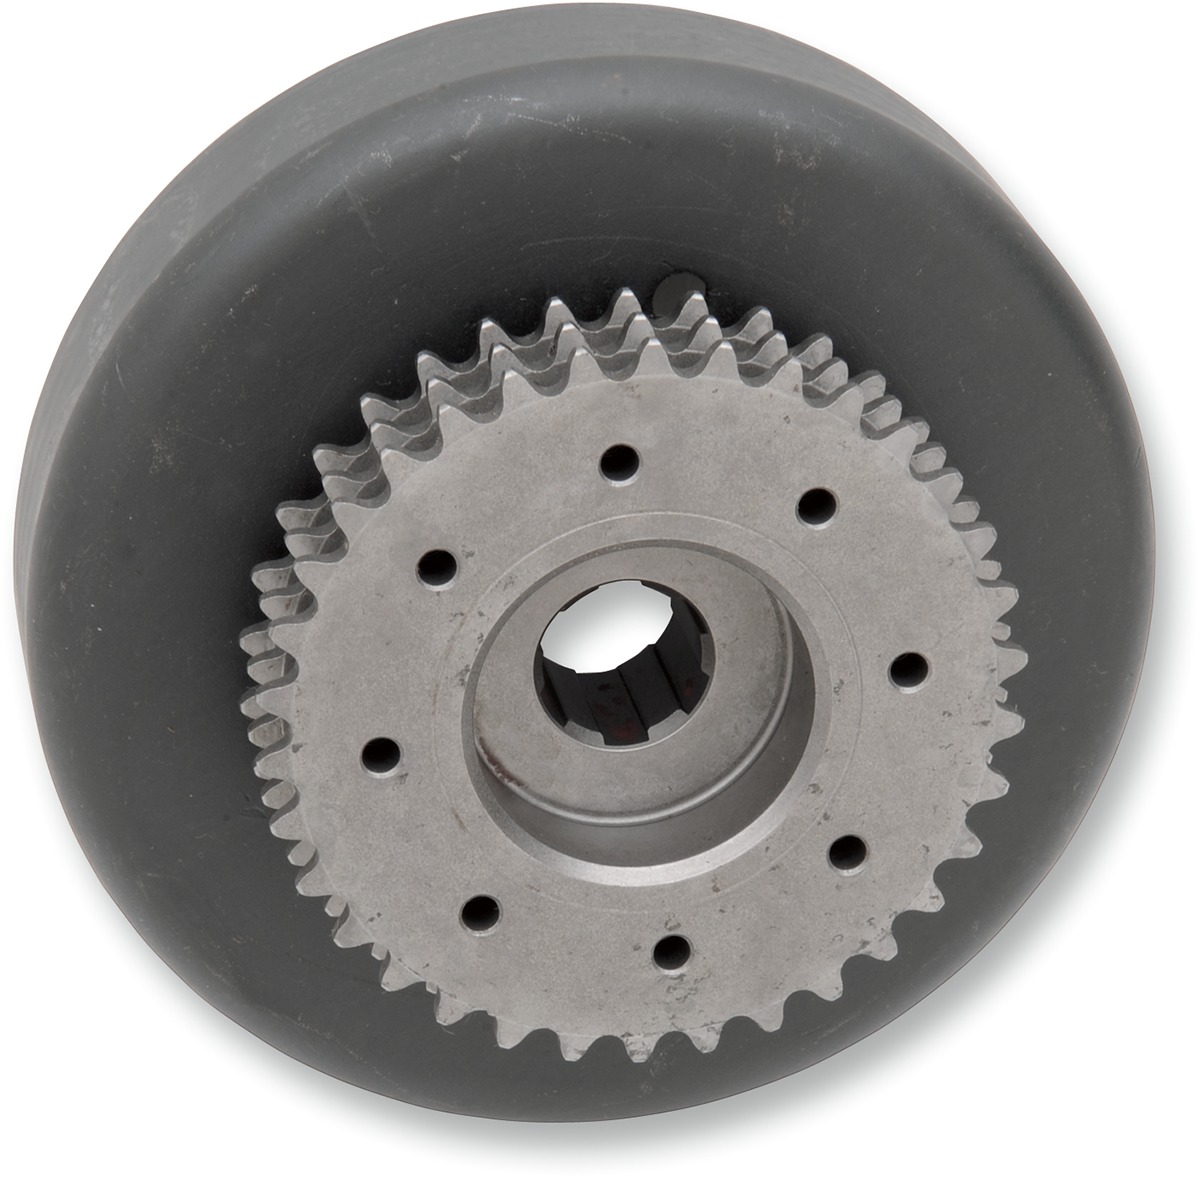 Alternator Rotor 20A - For 91-03 Harley XL Sportster Replaces #32413-92A - Click Image to Close